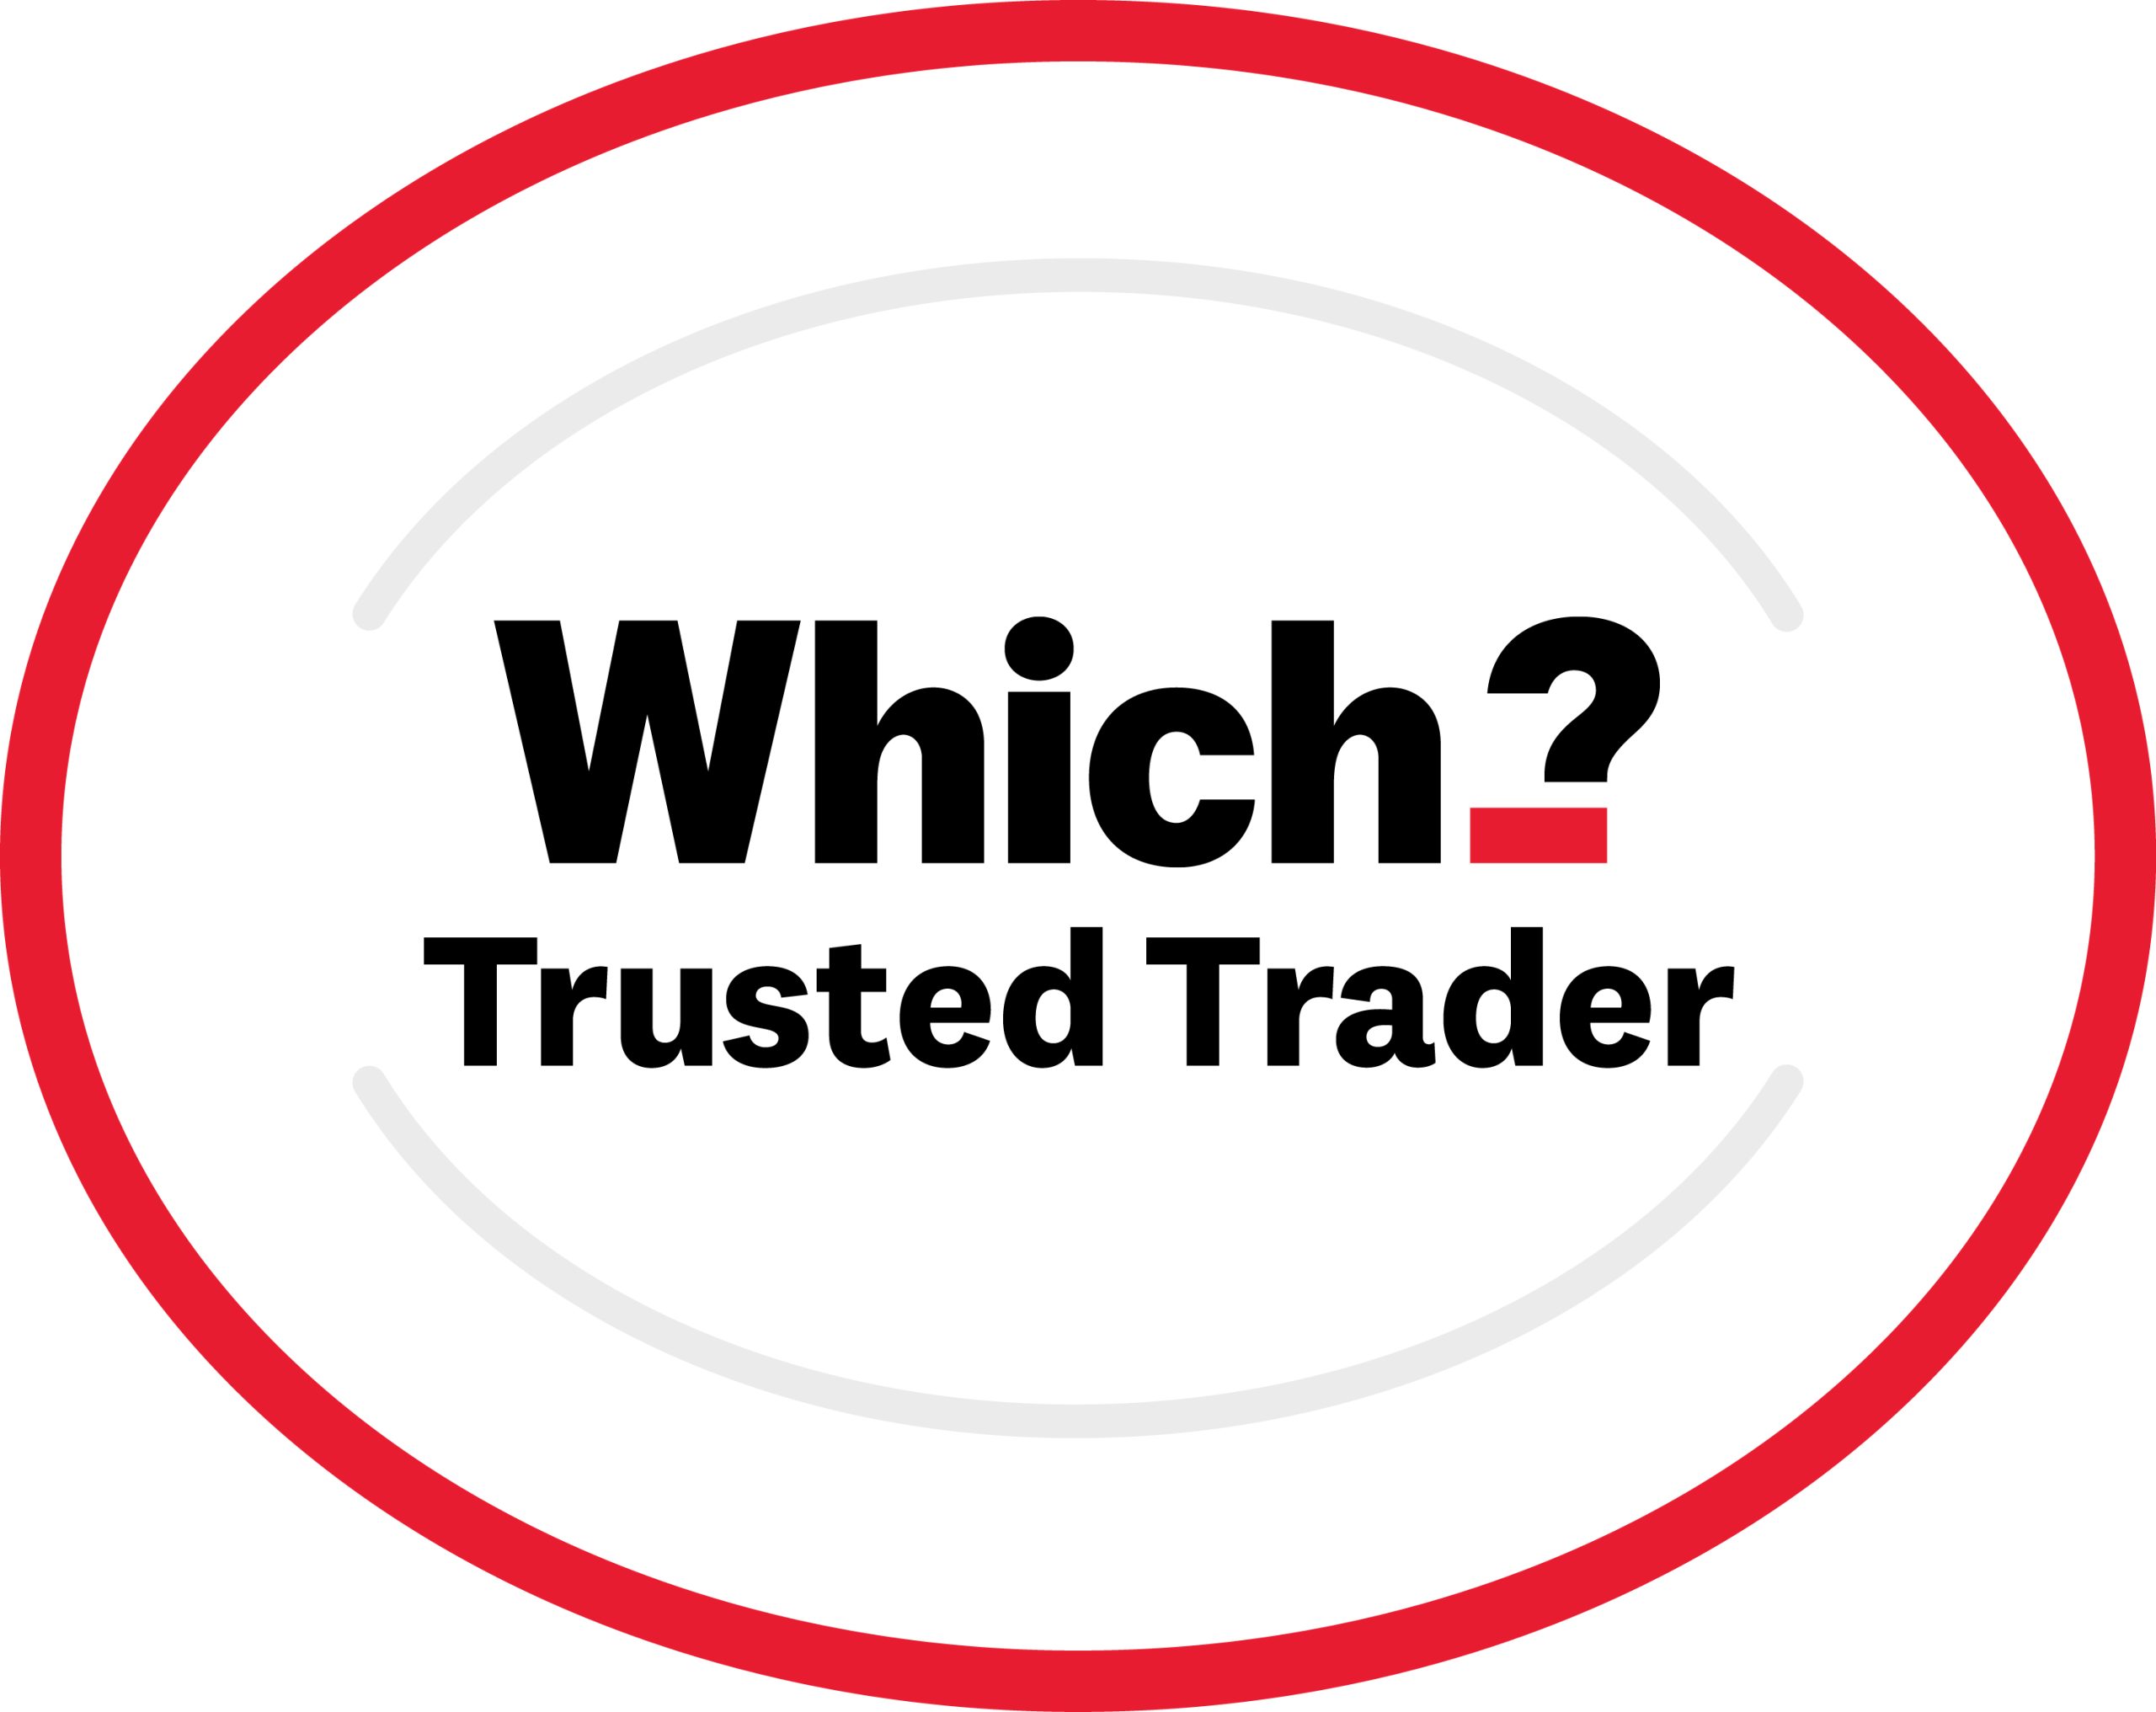 which-trusted-trader-logo